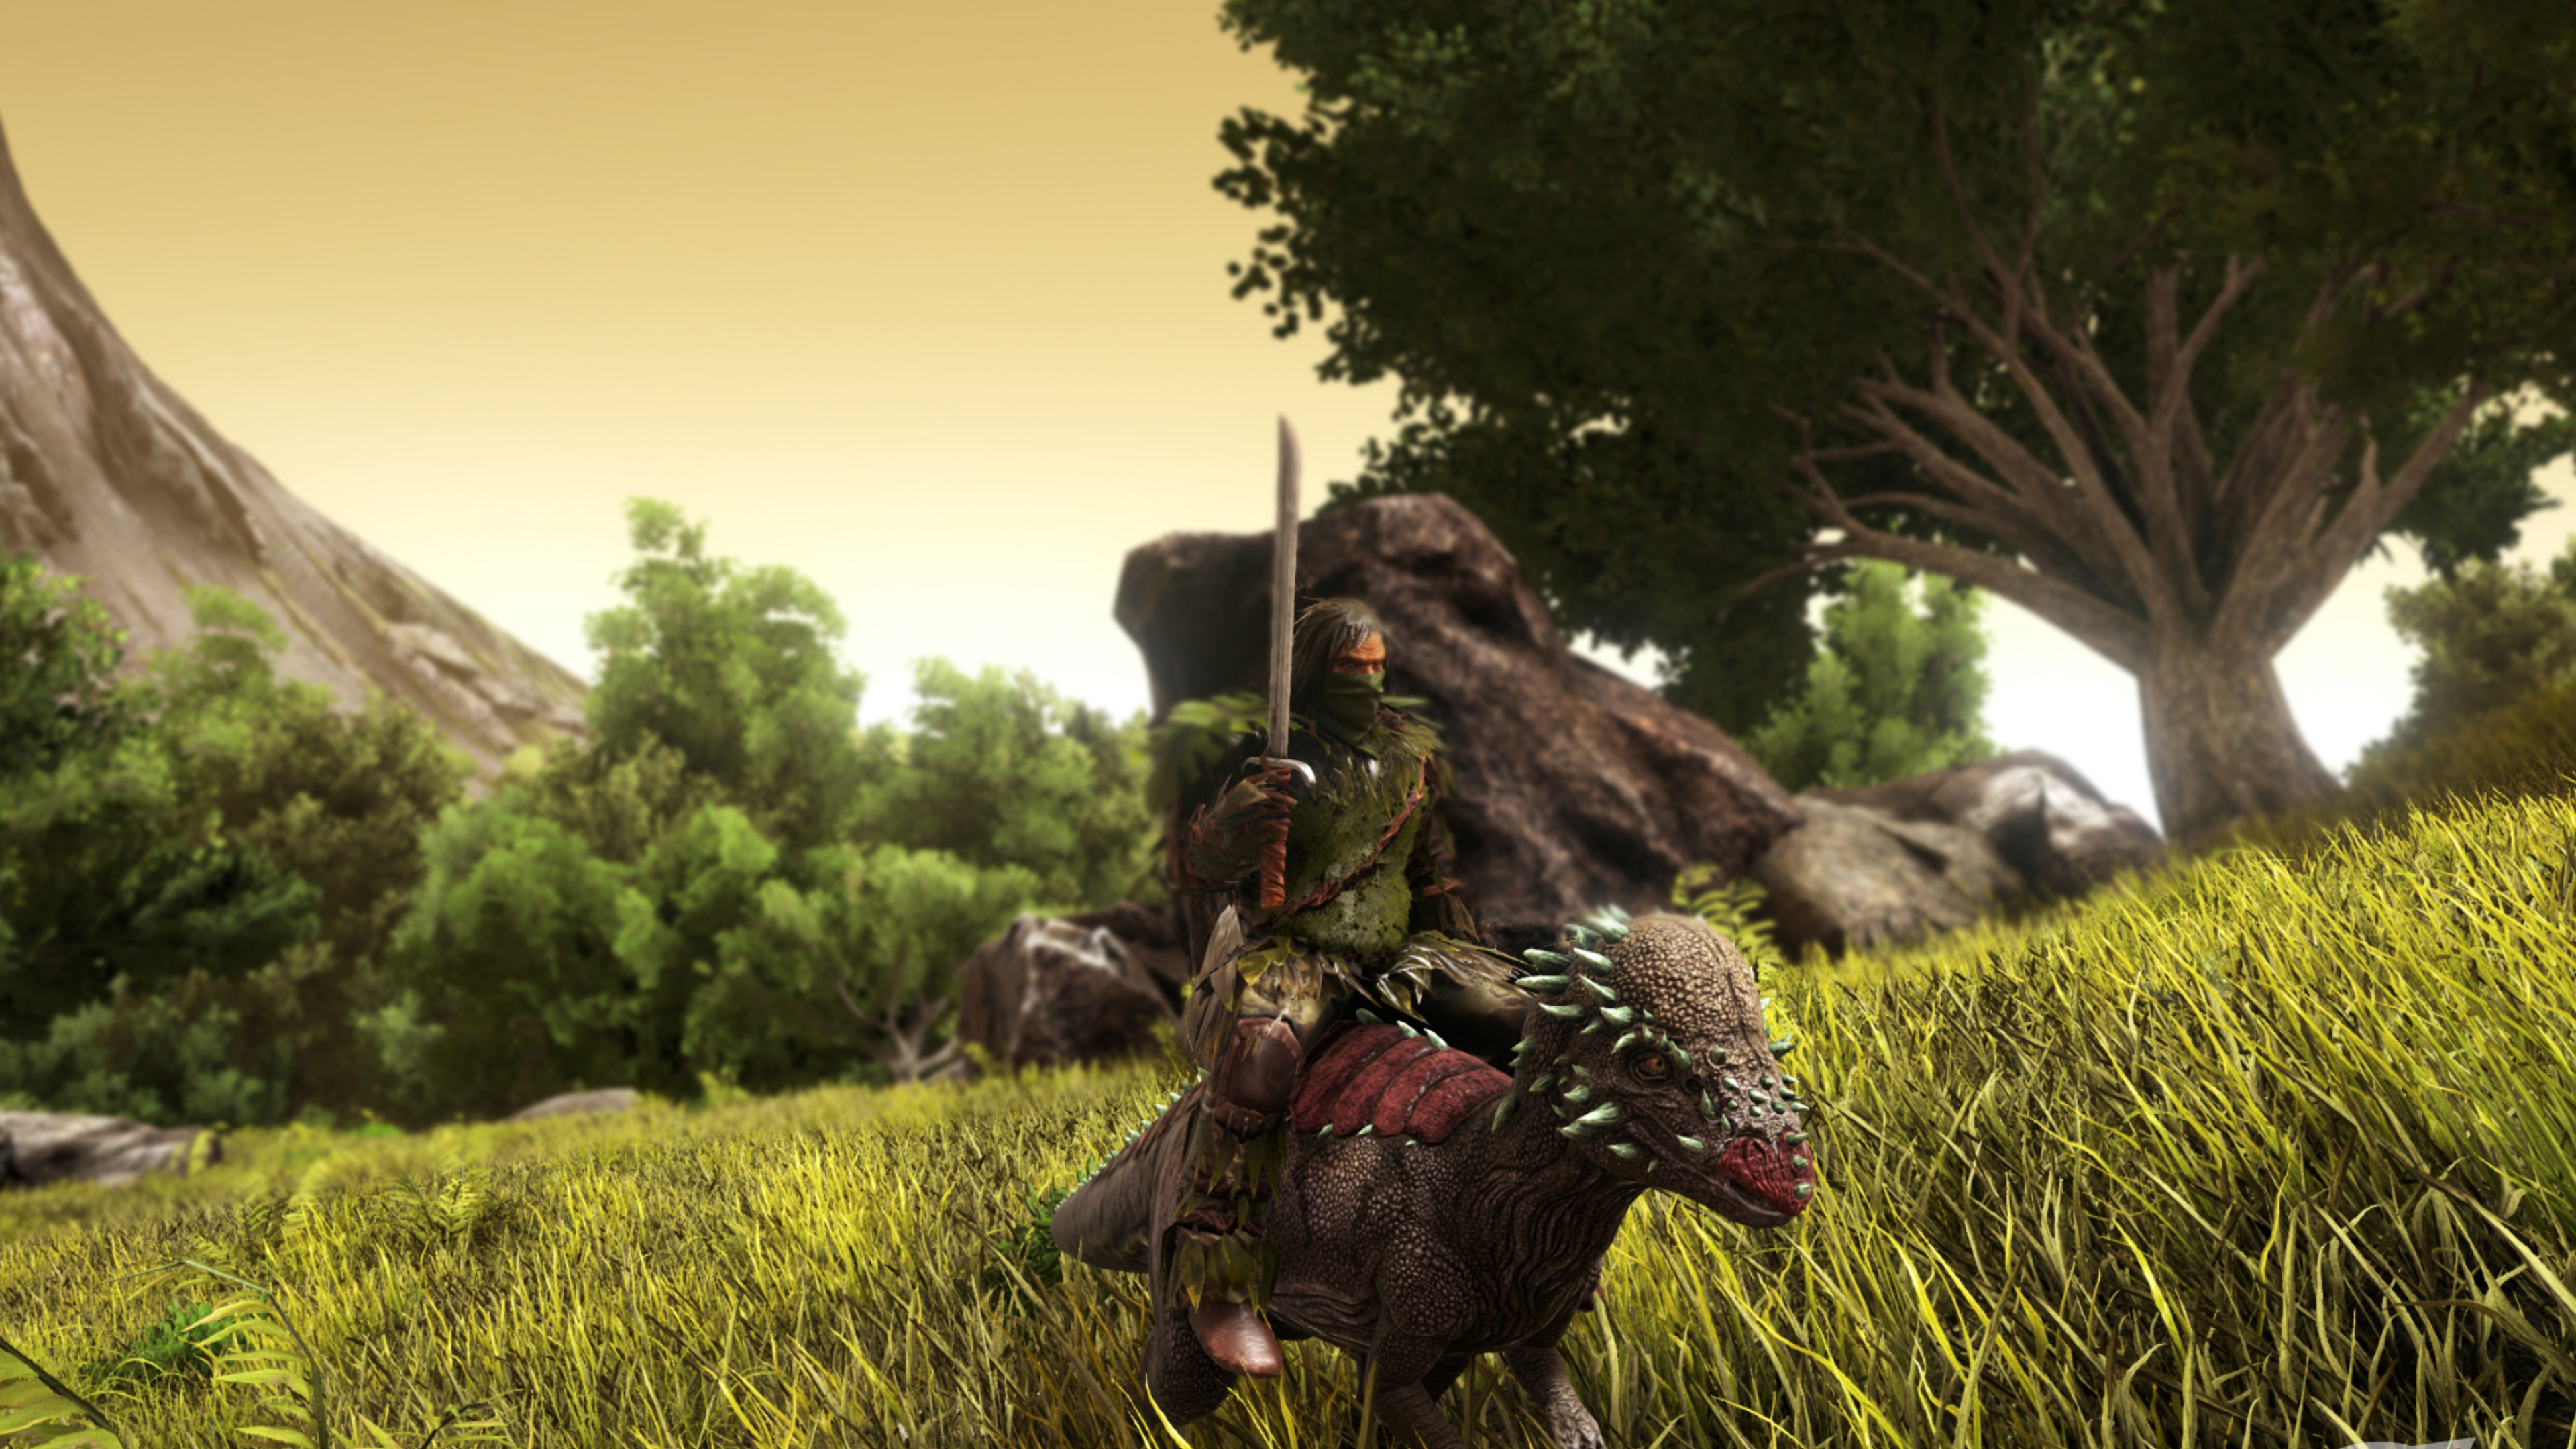 ARK: Survival Evolved: An open world, navigated by foot or by riding a prehistoric animal. 3840x2160 4K Wallpaper.